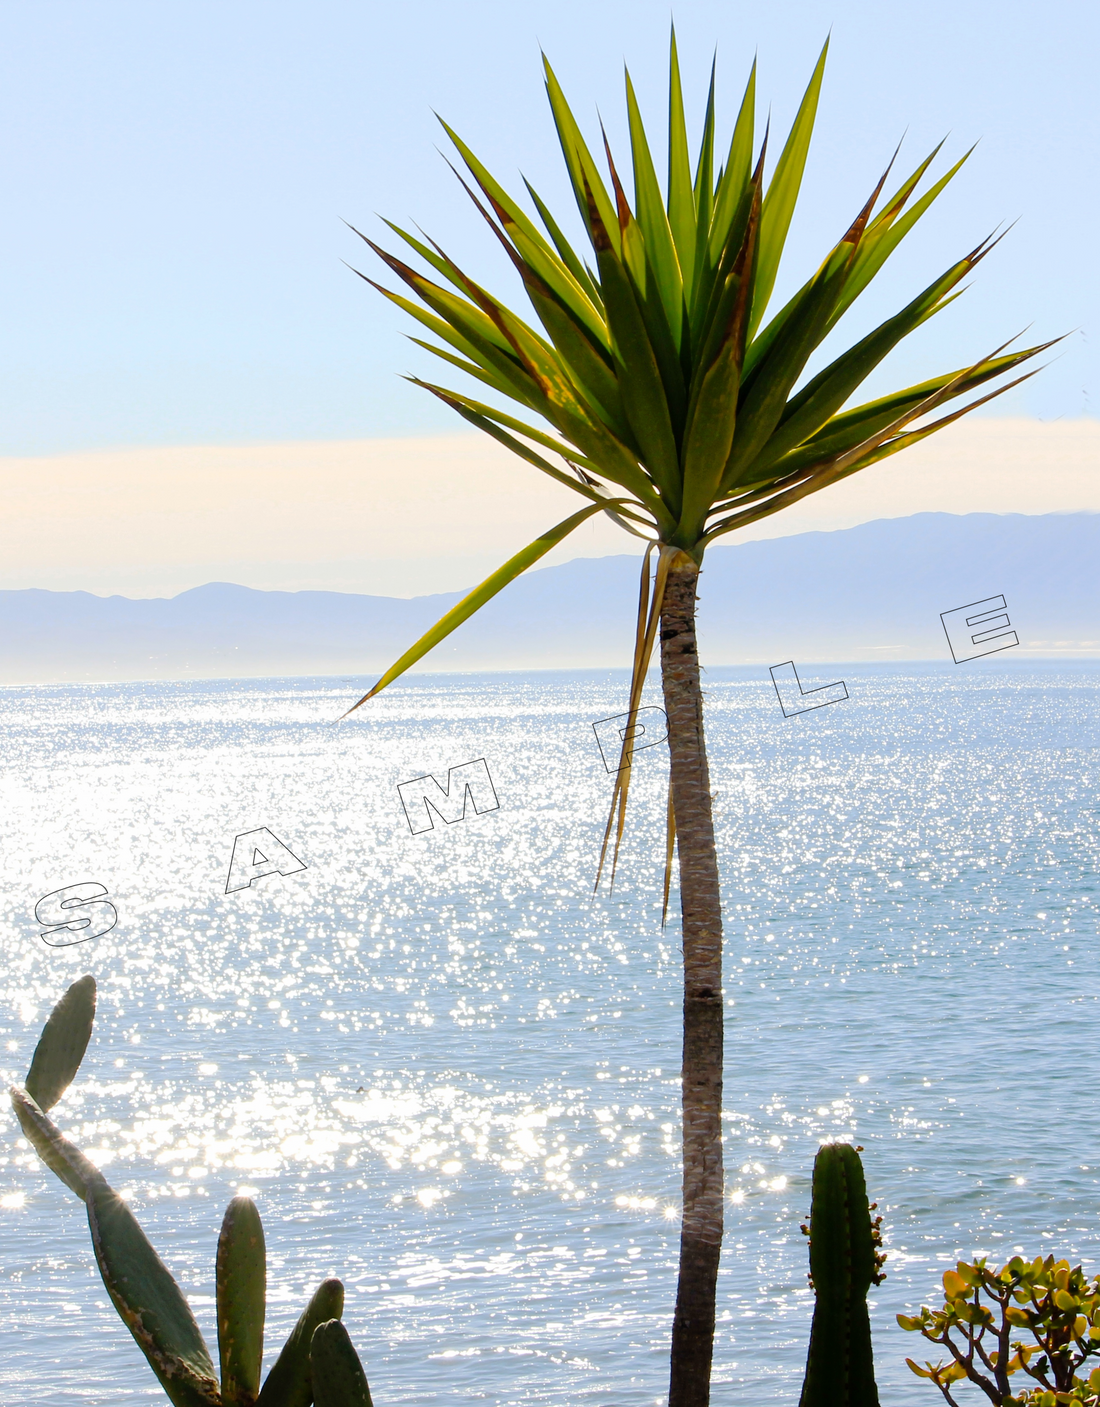 A yucca plant with spiky green leaves stands in the foreground, with a sparkling blue ocean visible behind it. Mountains can be seen in the distance. The word "SAMPLE" is overlaid on the image.